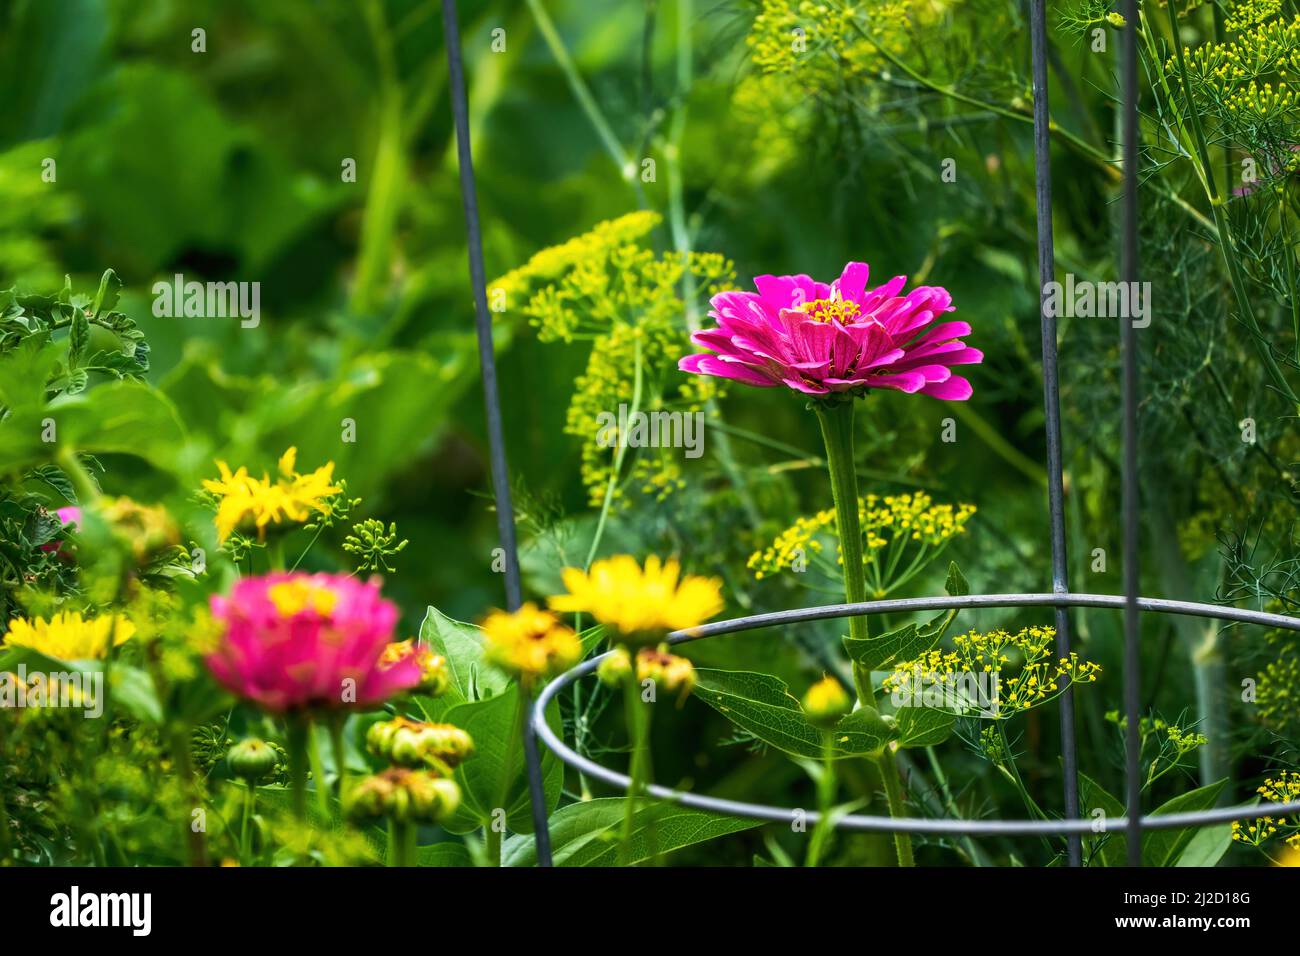 A blooming pink Zinnia flower, growing tall, stands out in a Community Garden. Stock Photo